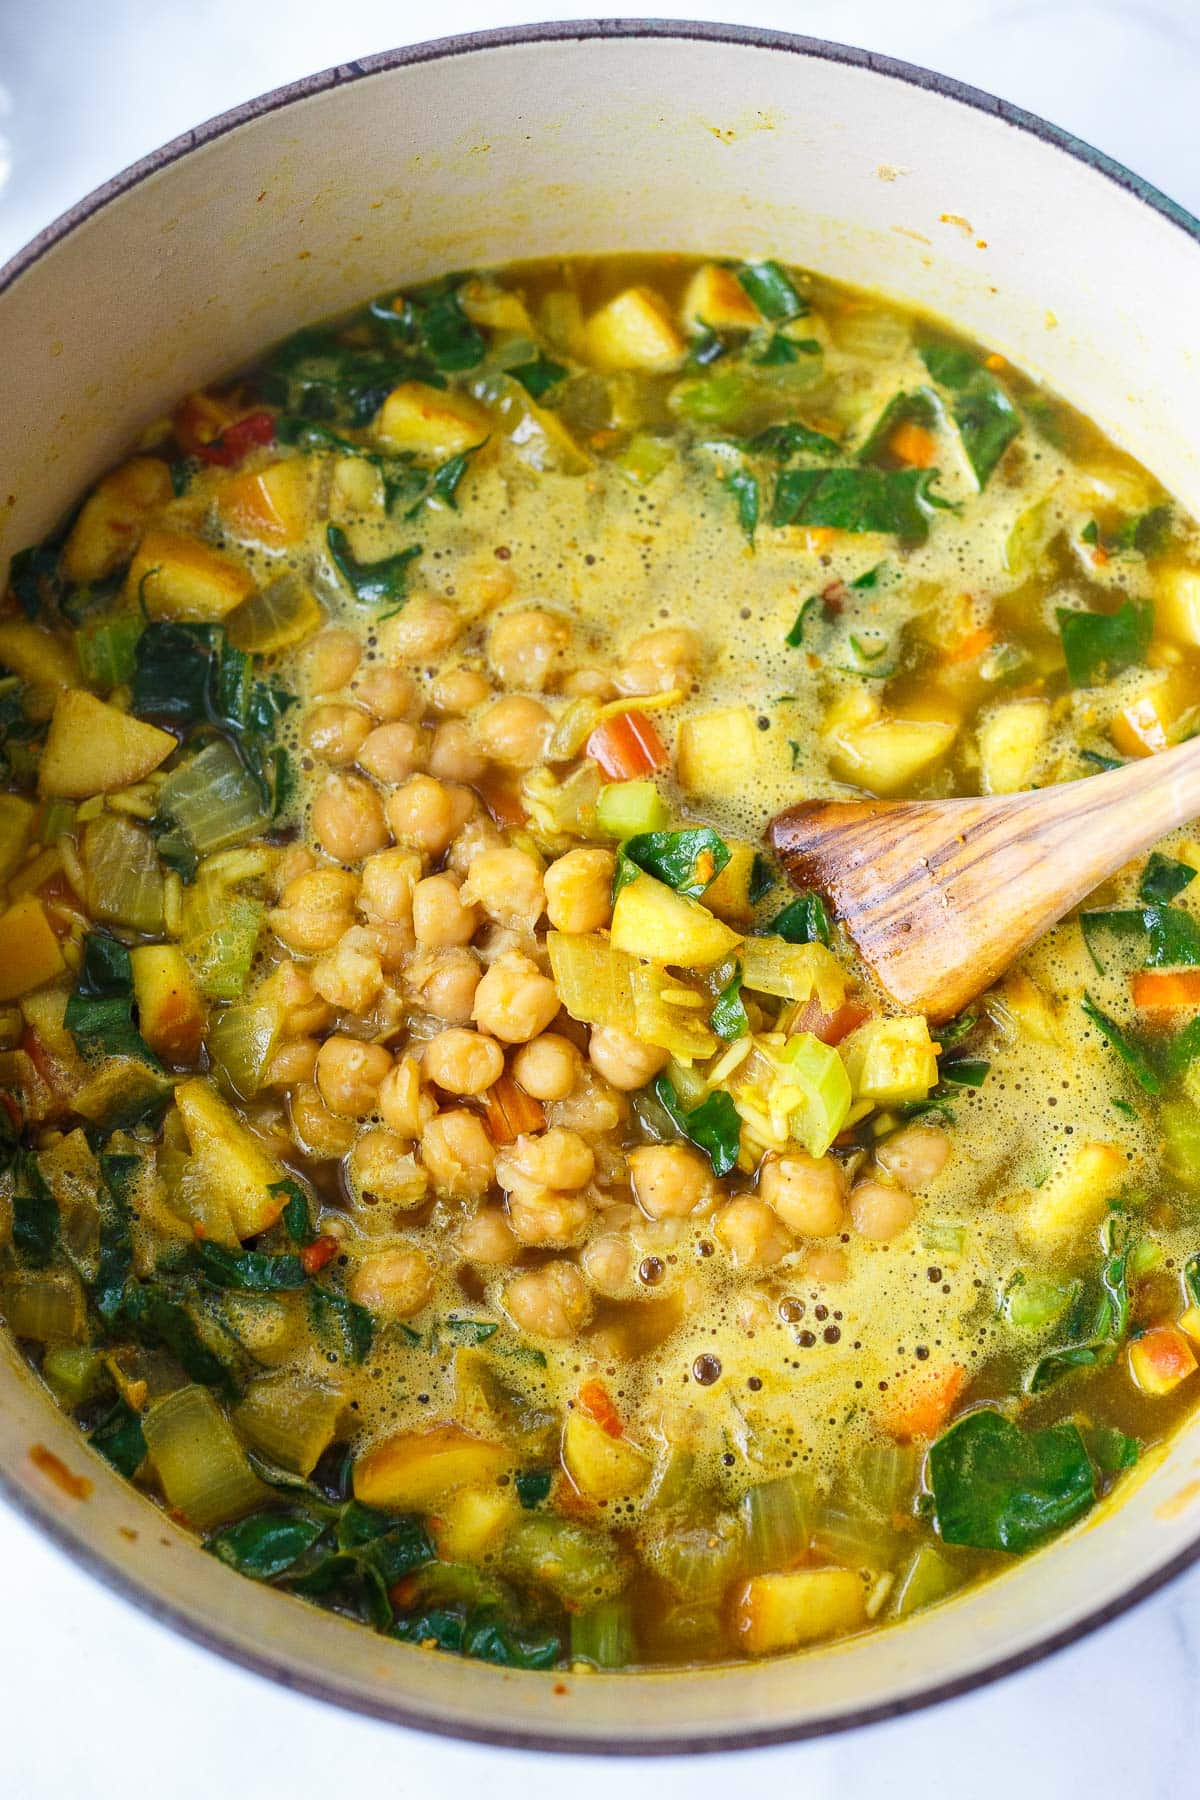 chickpea soup cooking in pot with diced vegetables and dark, leafy greens.